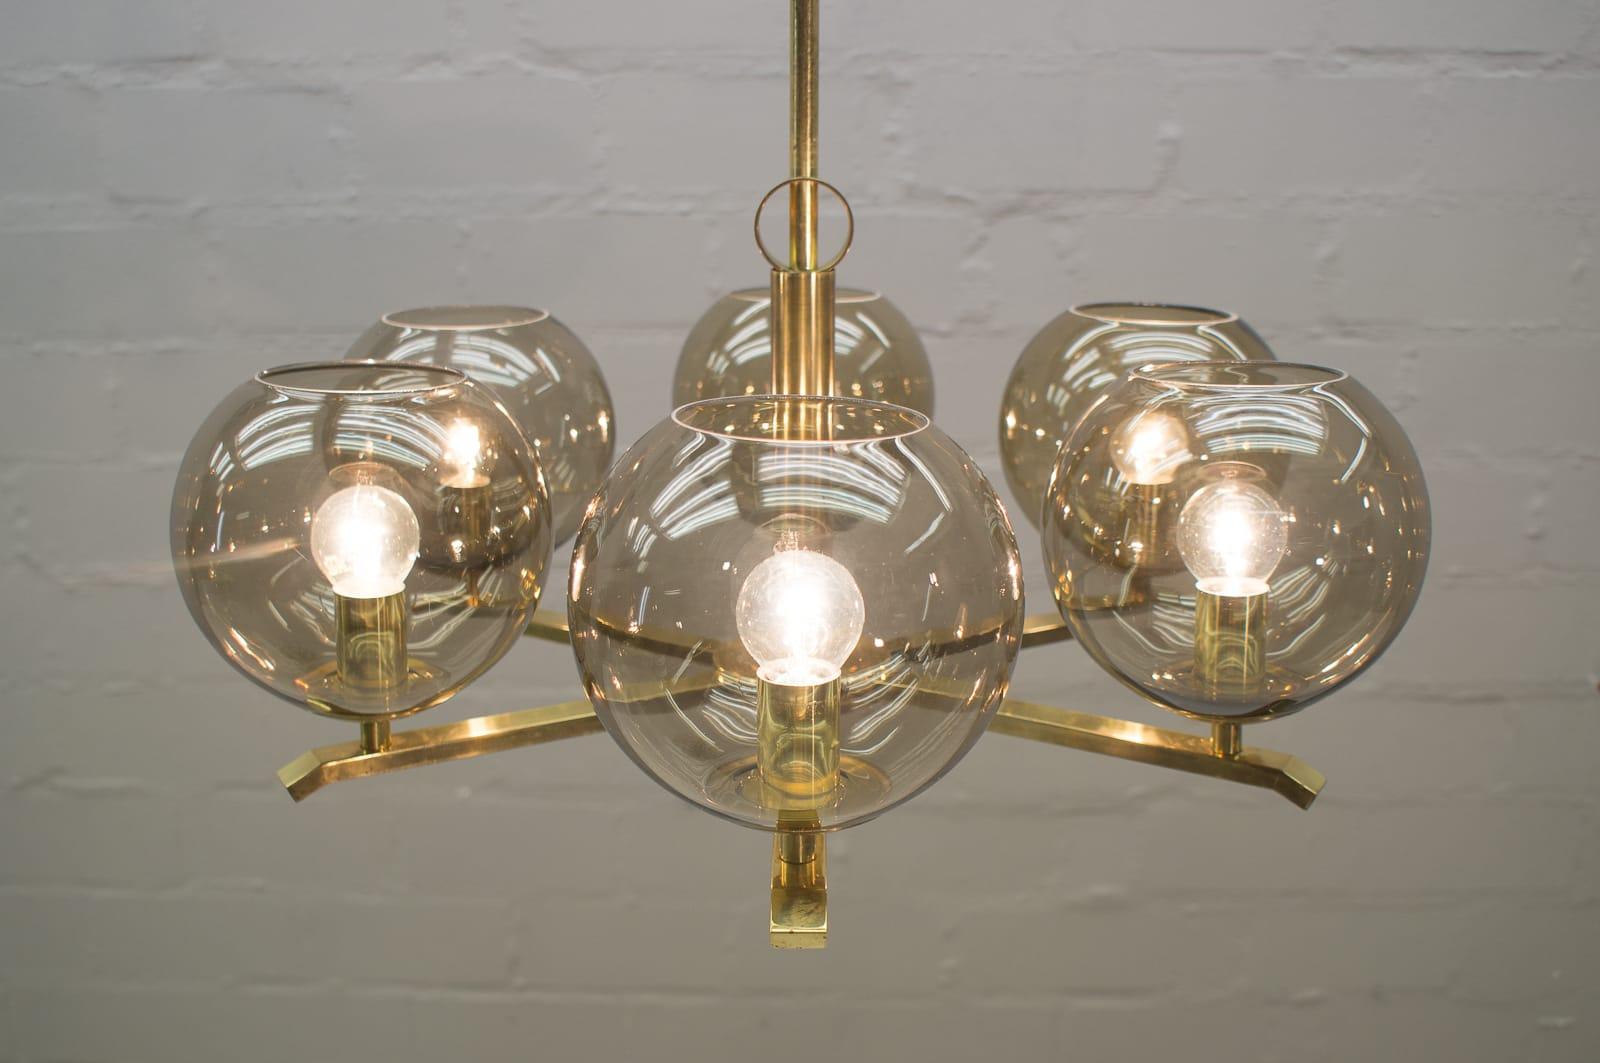 Mid-20th Century Elegant 1960s Brass Ceiling Lamp with 8 Smoked Glass Globes, Germany For Sale